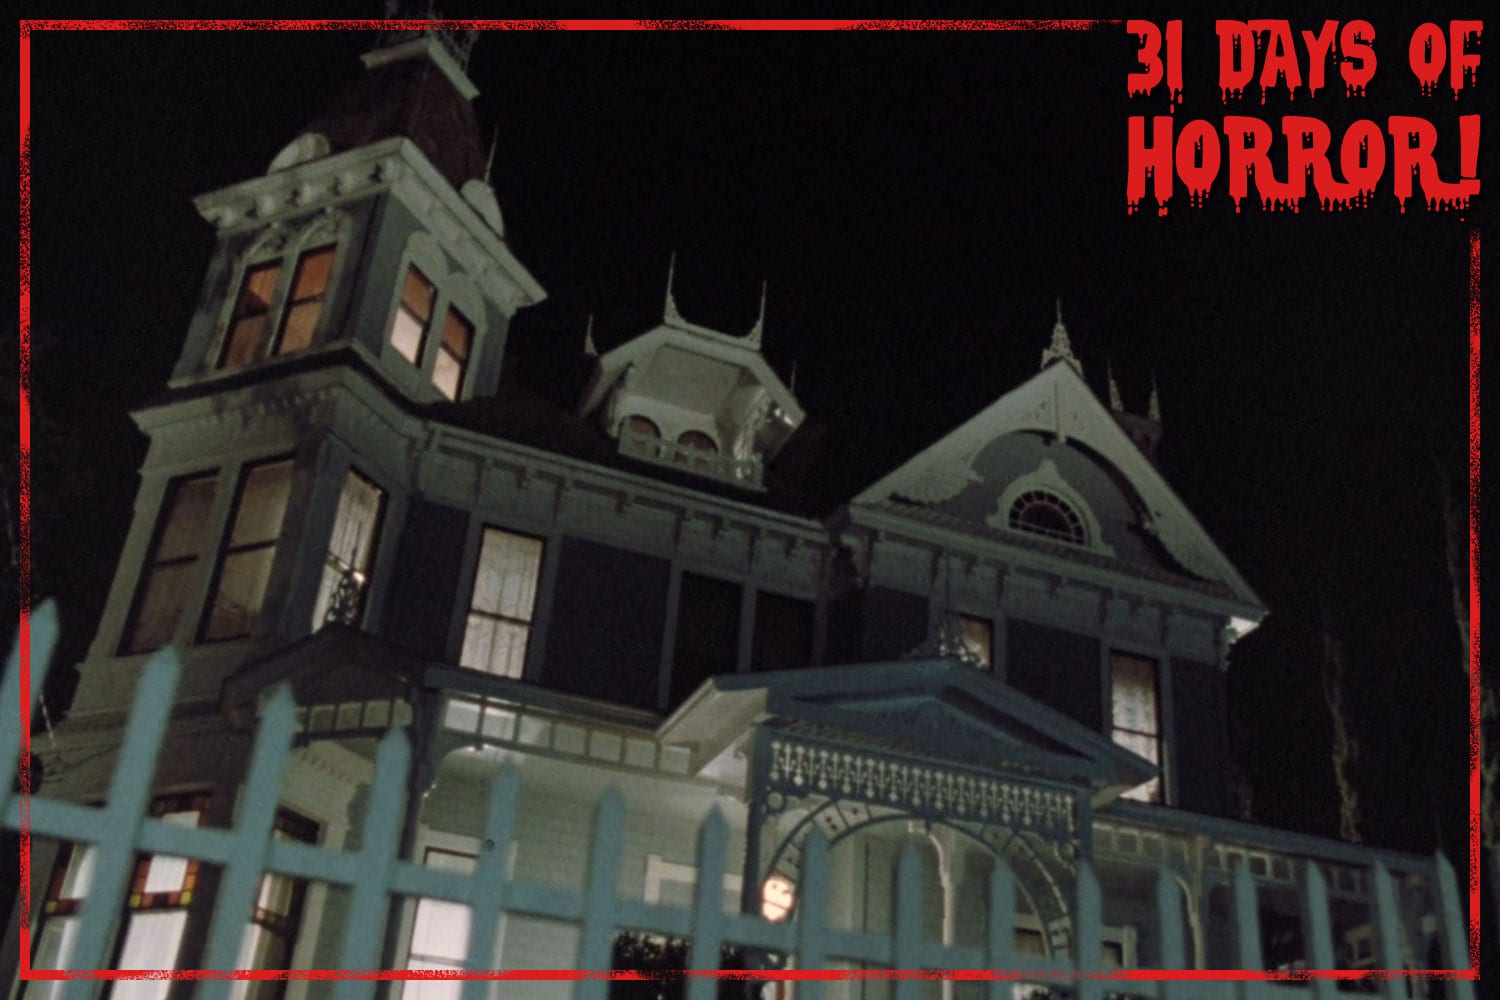 House (1986) – 31 Days of Horror: Oct 19